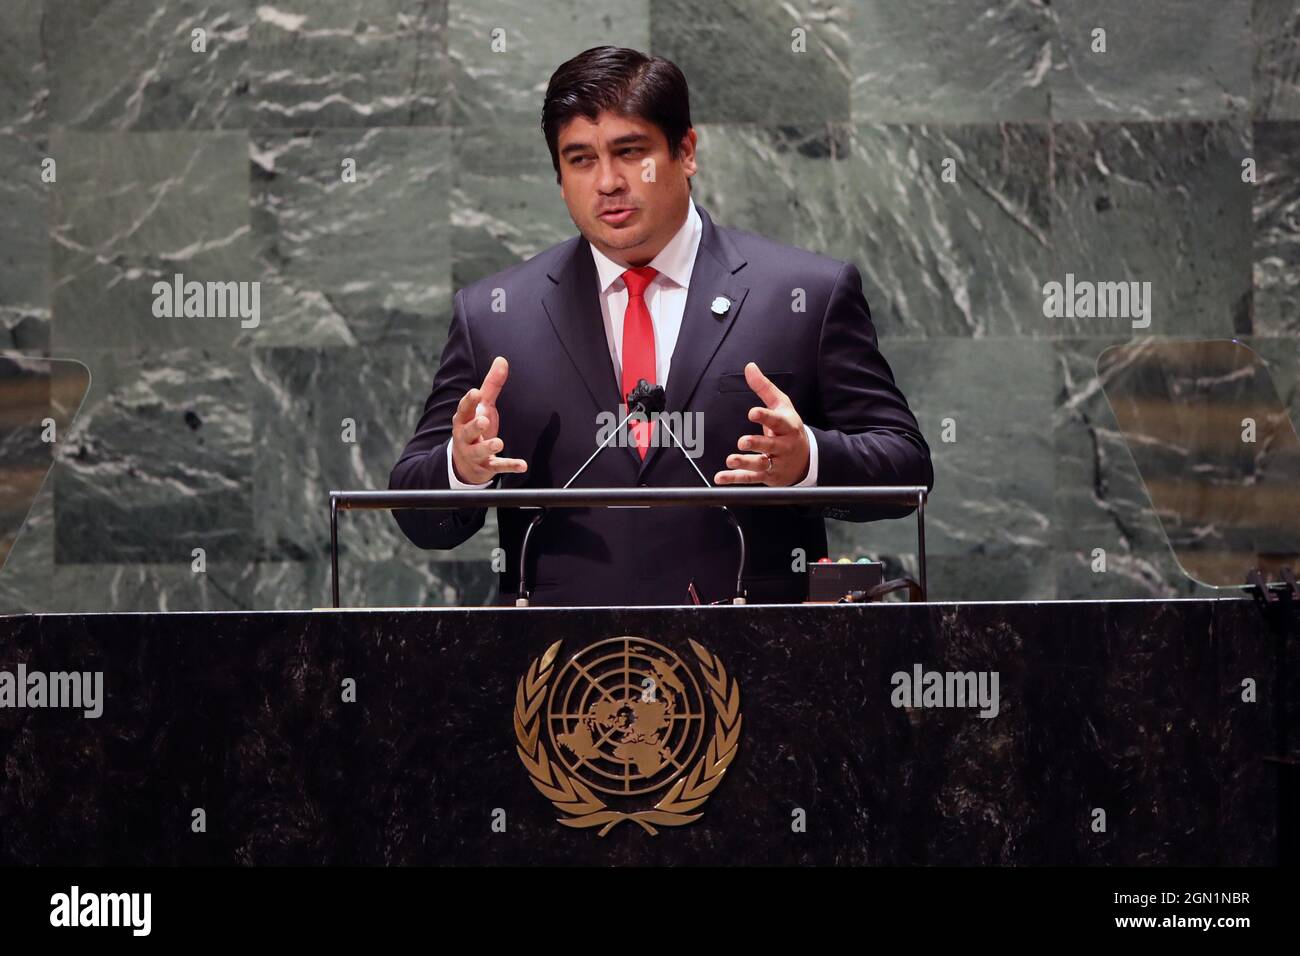 New York, United States. 21st Sep, 2021. The President of Costa Rica Carlos Alvarado Quesada speaks at the 76th Session of the United Nations General Assembly remotely on Tuesday, September 21, 2021 at U.N. headquarters. Pool Photo by Spencer Platt/UPI Credit: UPI/Alamy Live News Stock Photo